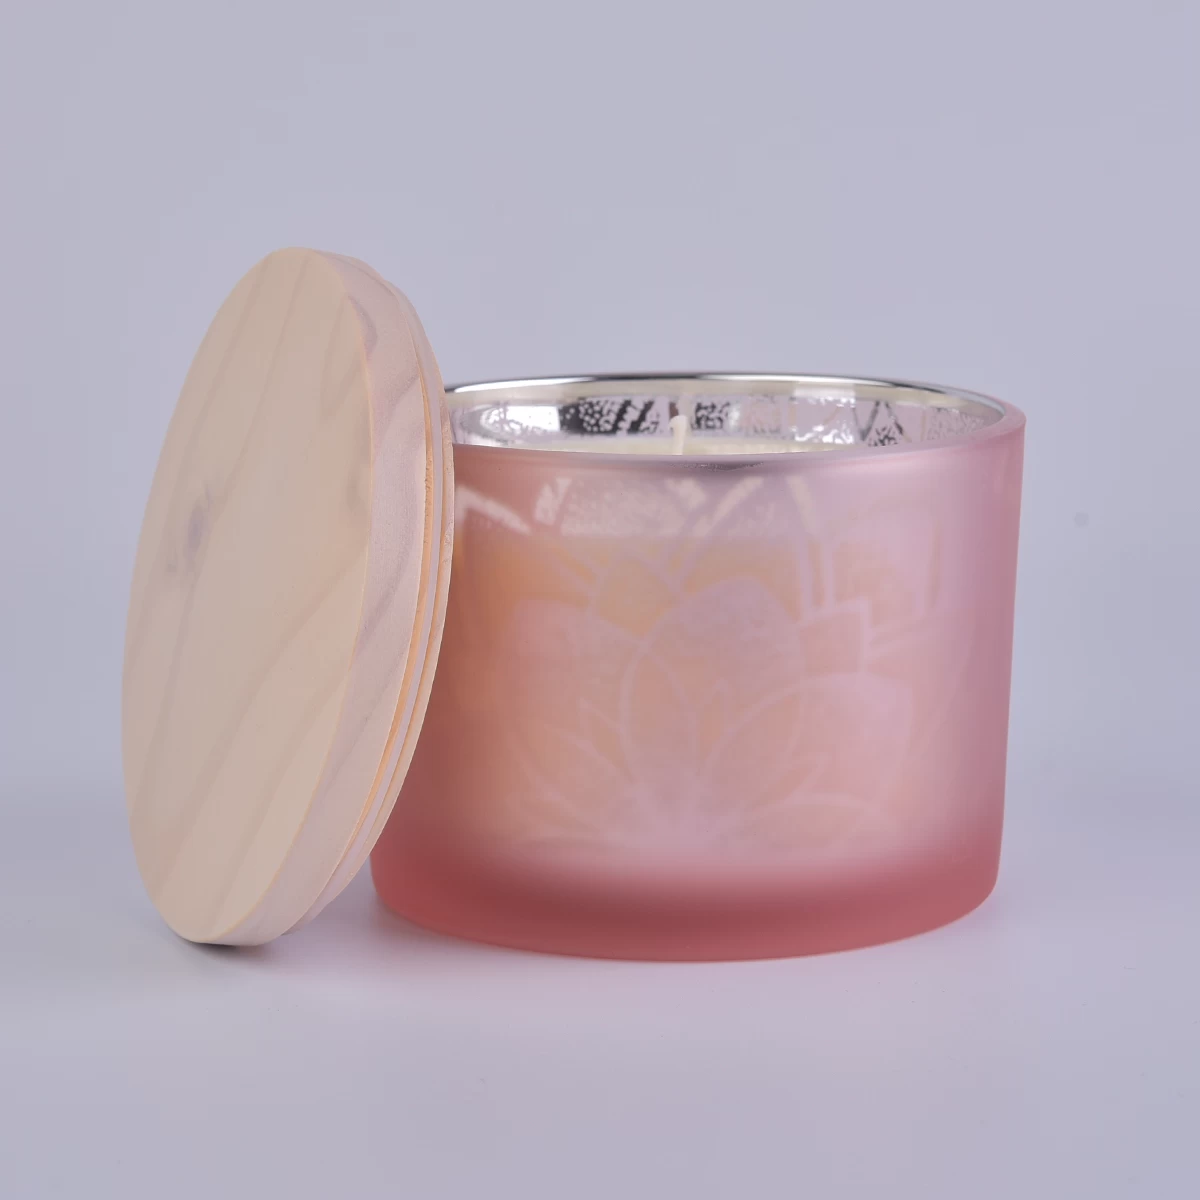 14 oz matte pink glass container, decorative glass candle holders